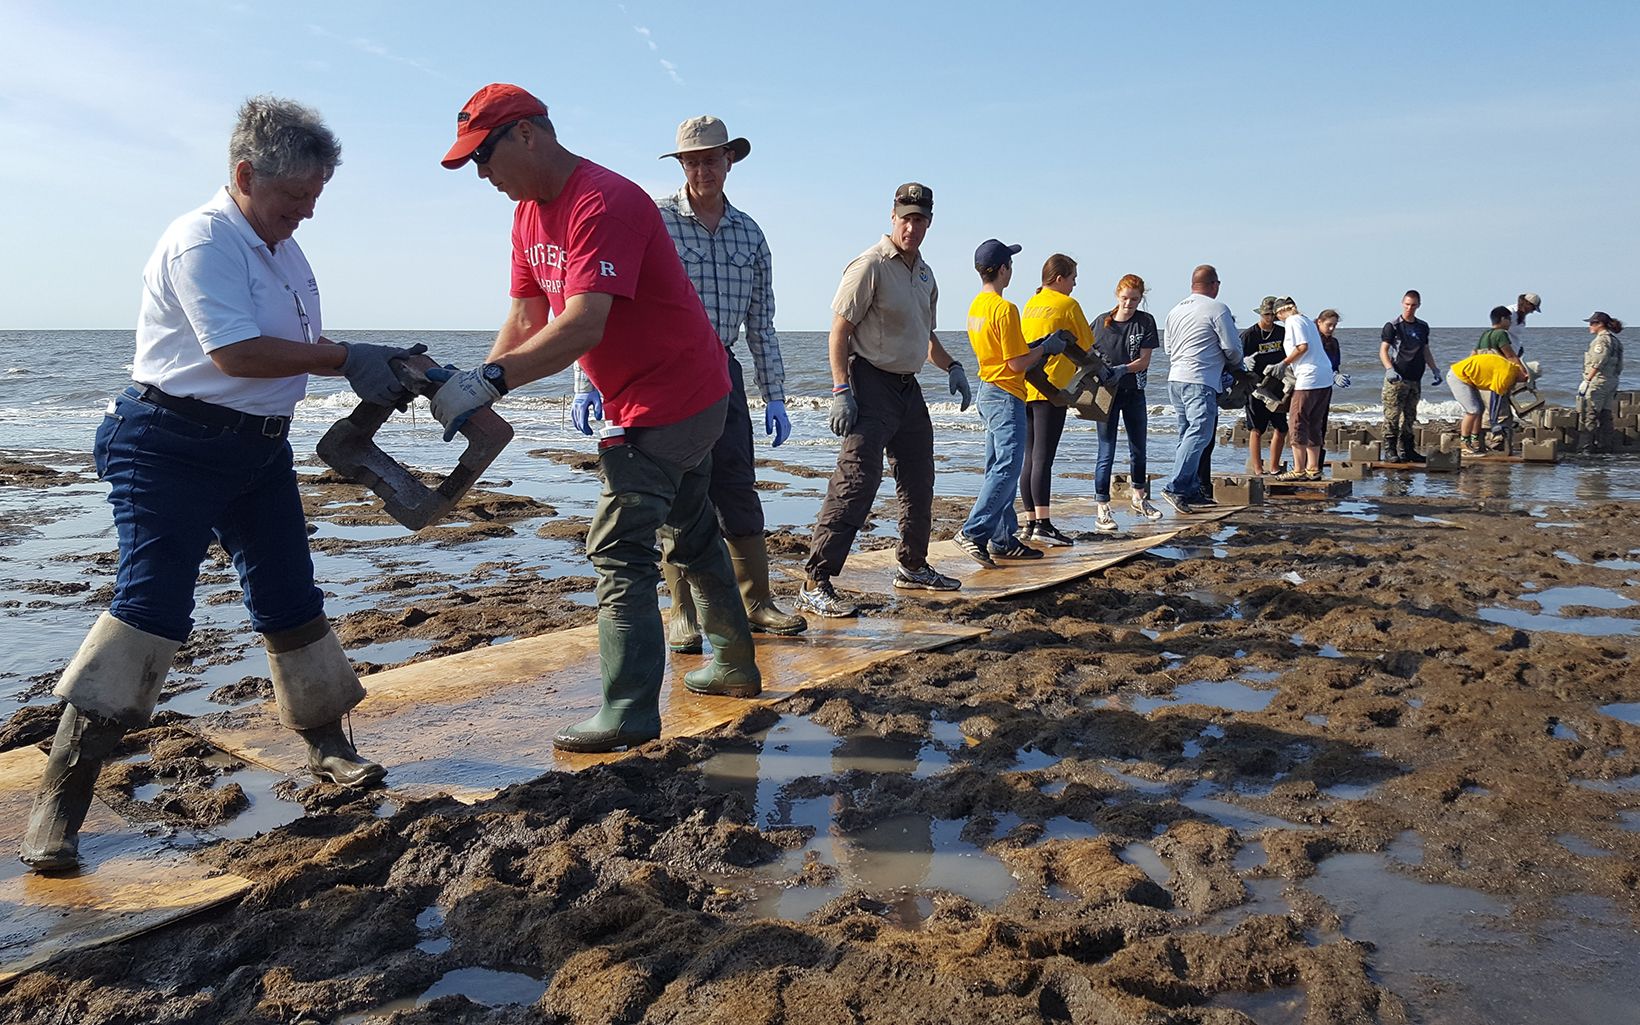 Volunteers pass a cinderblock from person to person to place it as part of an oyster castle in shallow water.